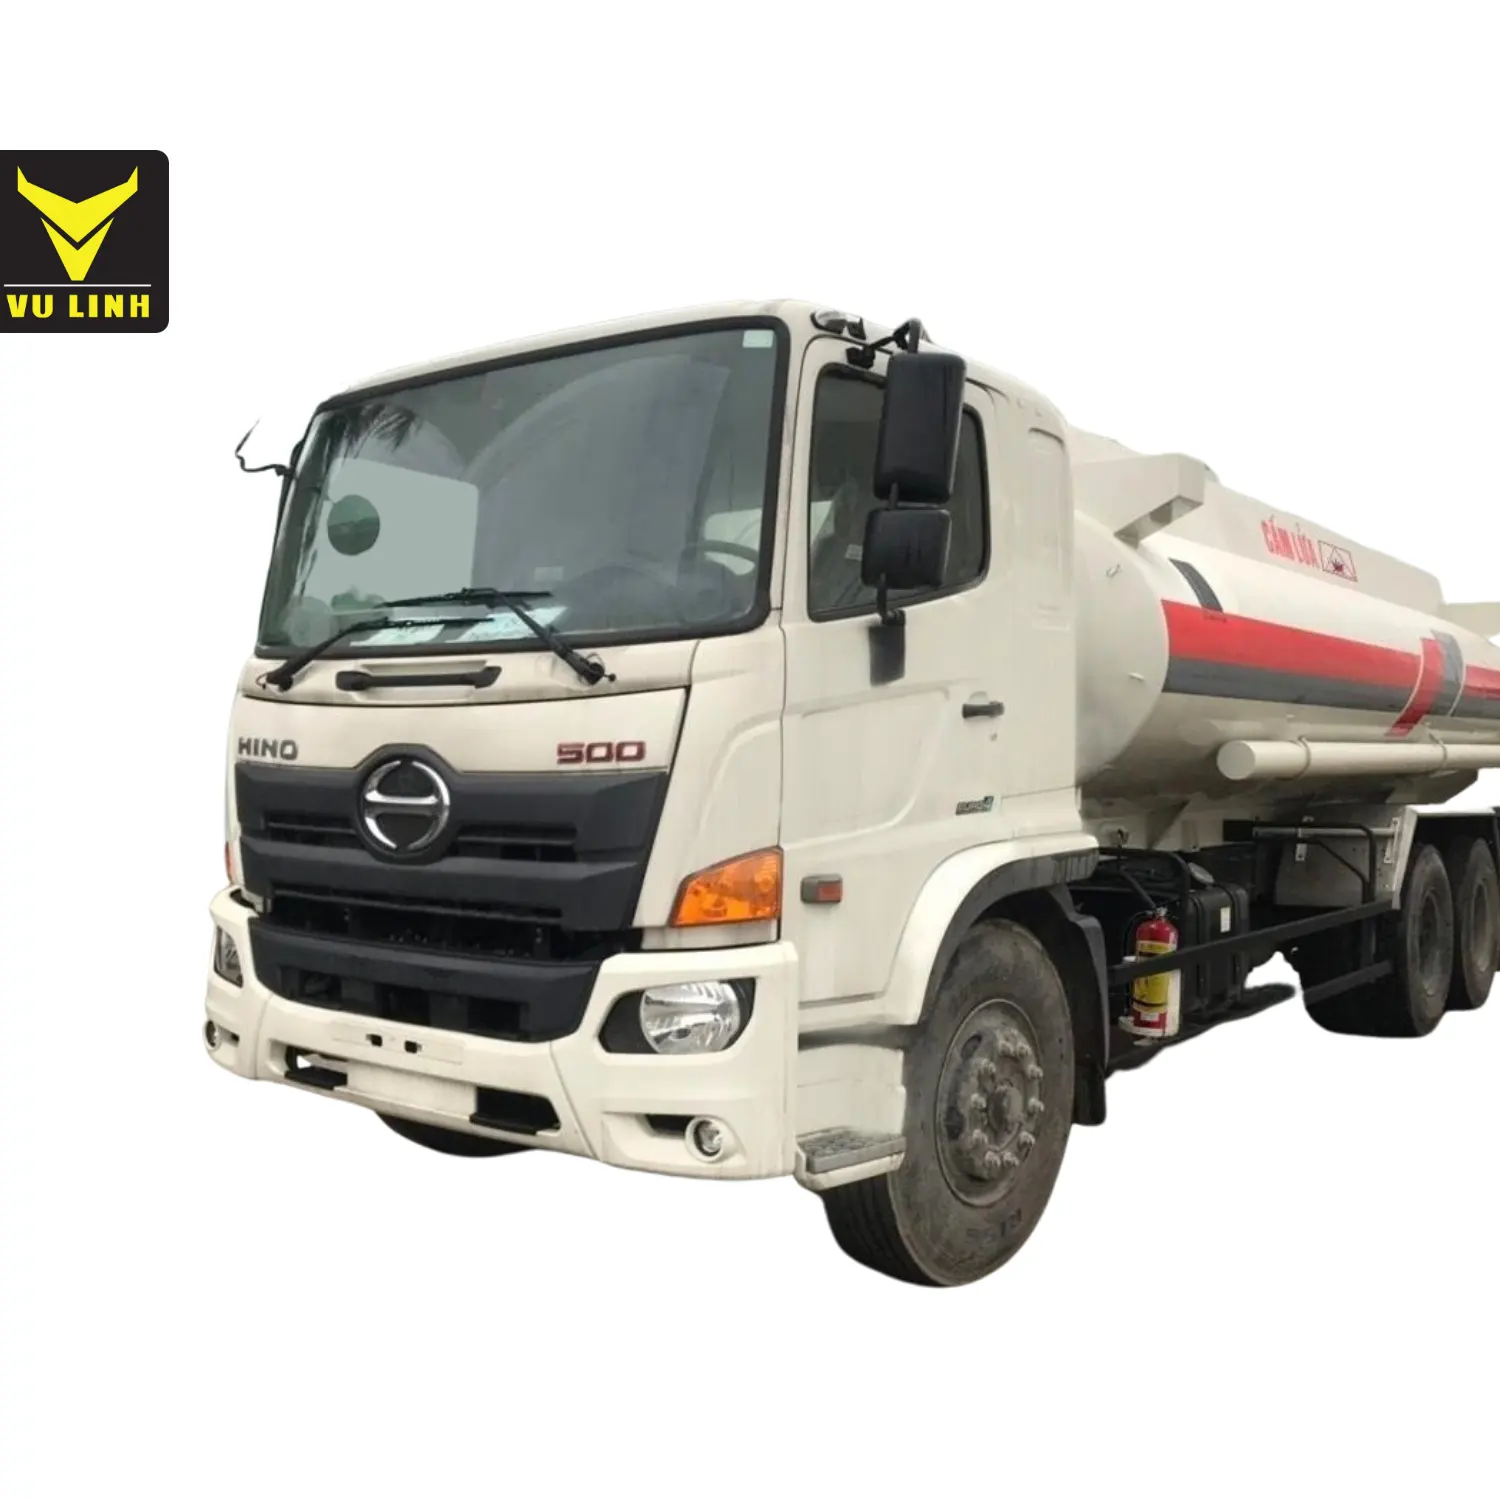 (Used specialized vehicles) Petrol tanker truck HINO FL 19cbm for sale by VU LINH AUTO Vietnam 2023